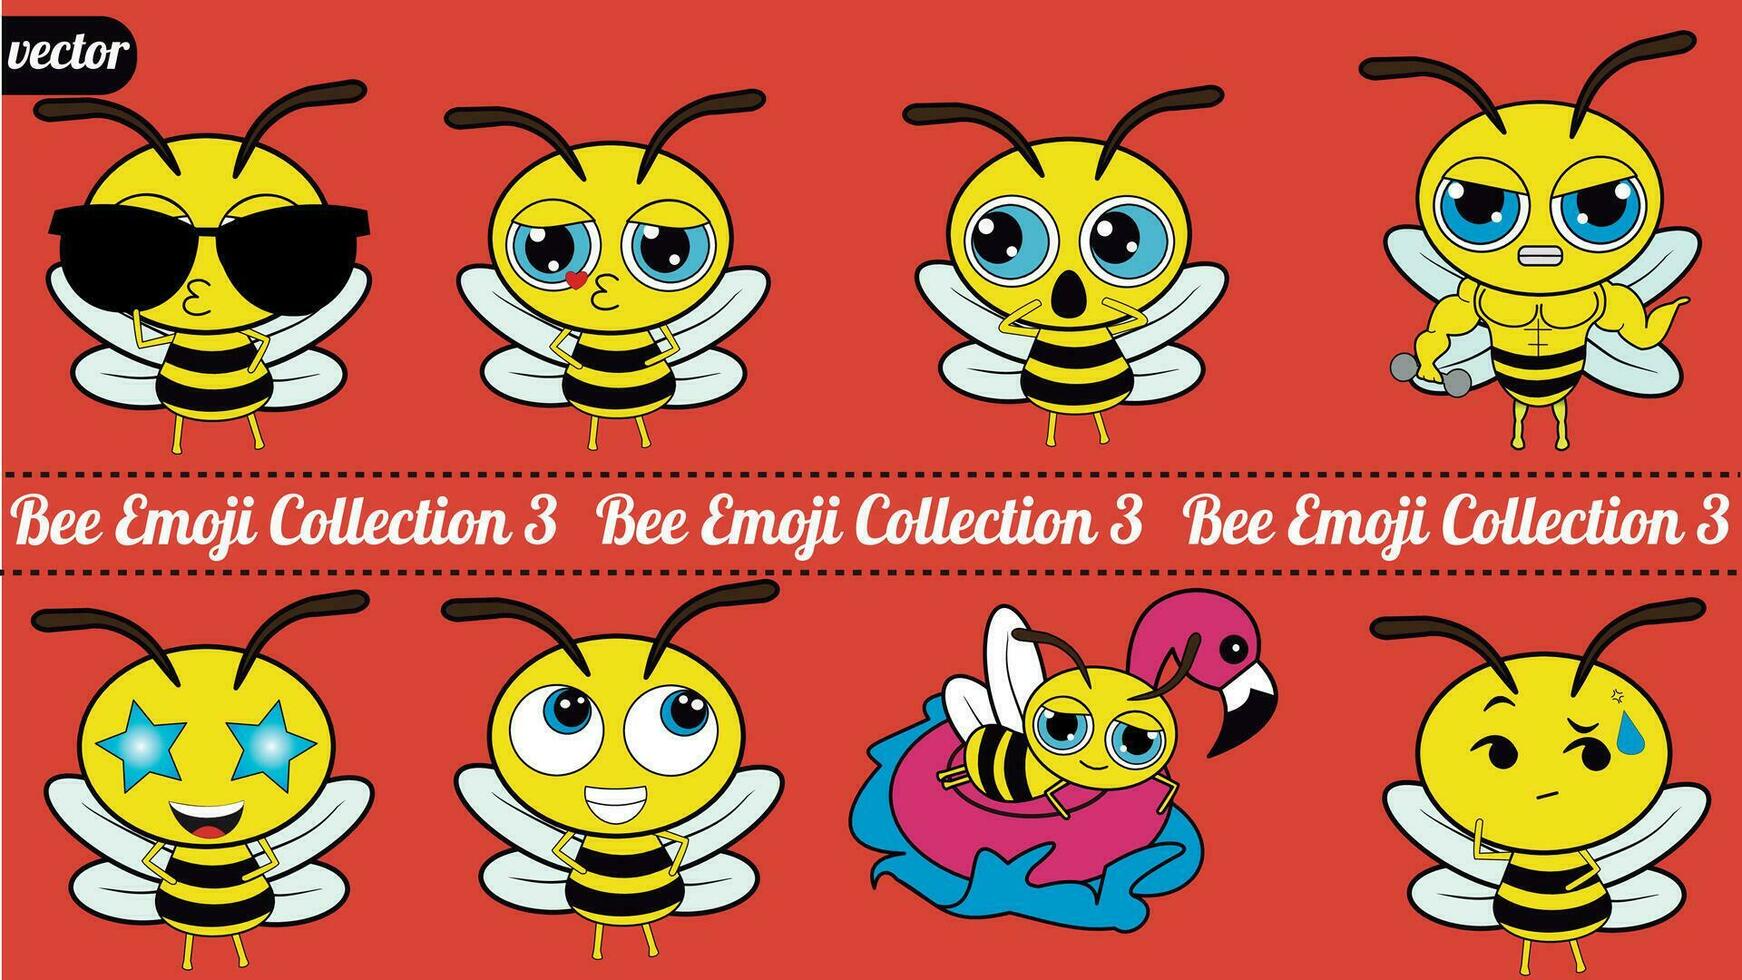 This charming bee emoji pack features an adorable little bee in a variety of angles and expressions. There are three collections of bee emoticons I made with great care. vector